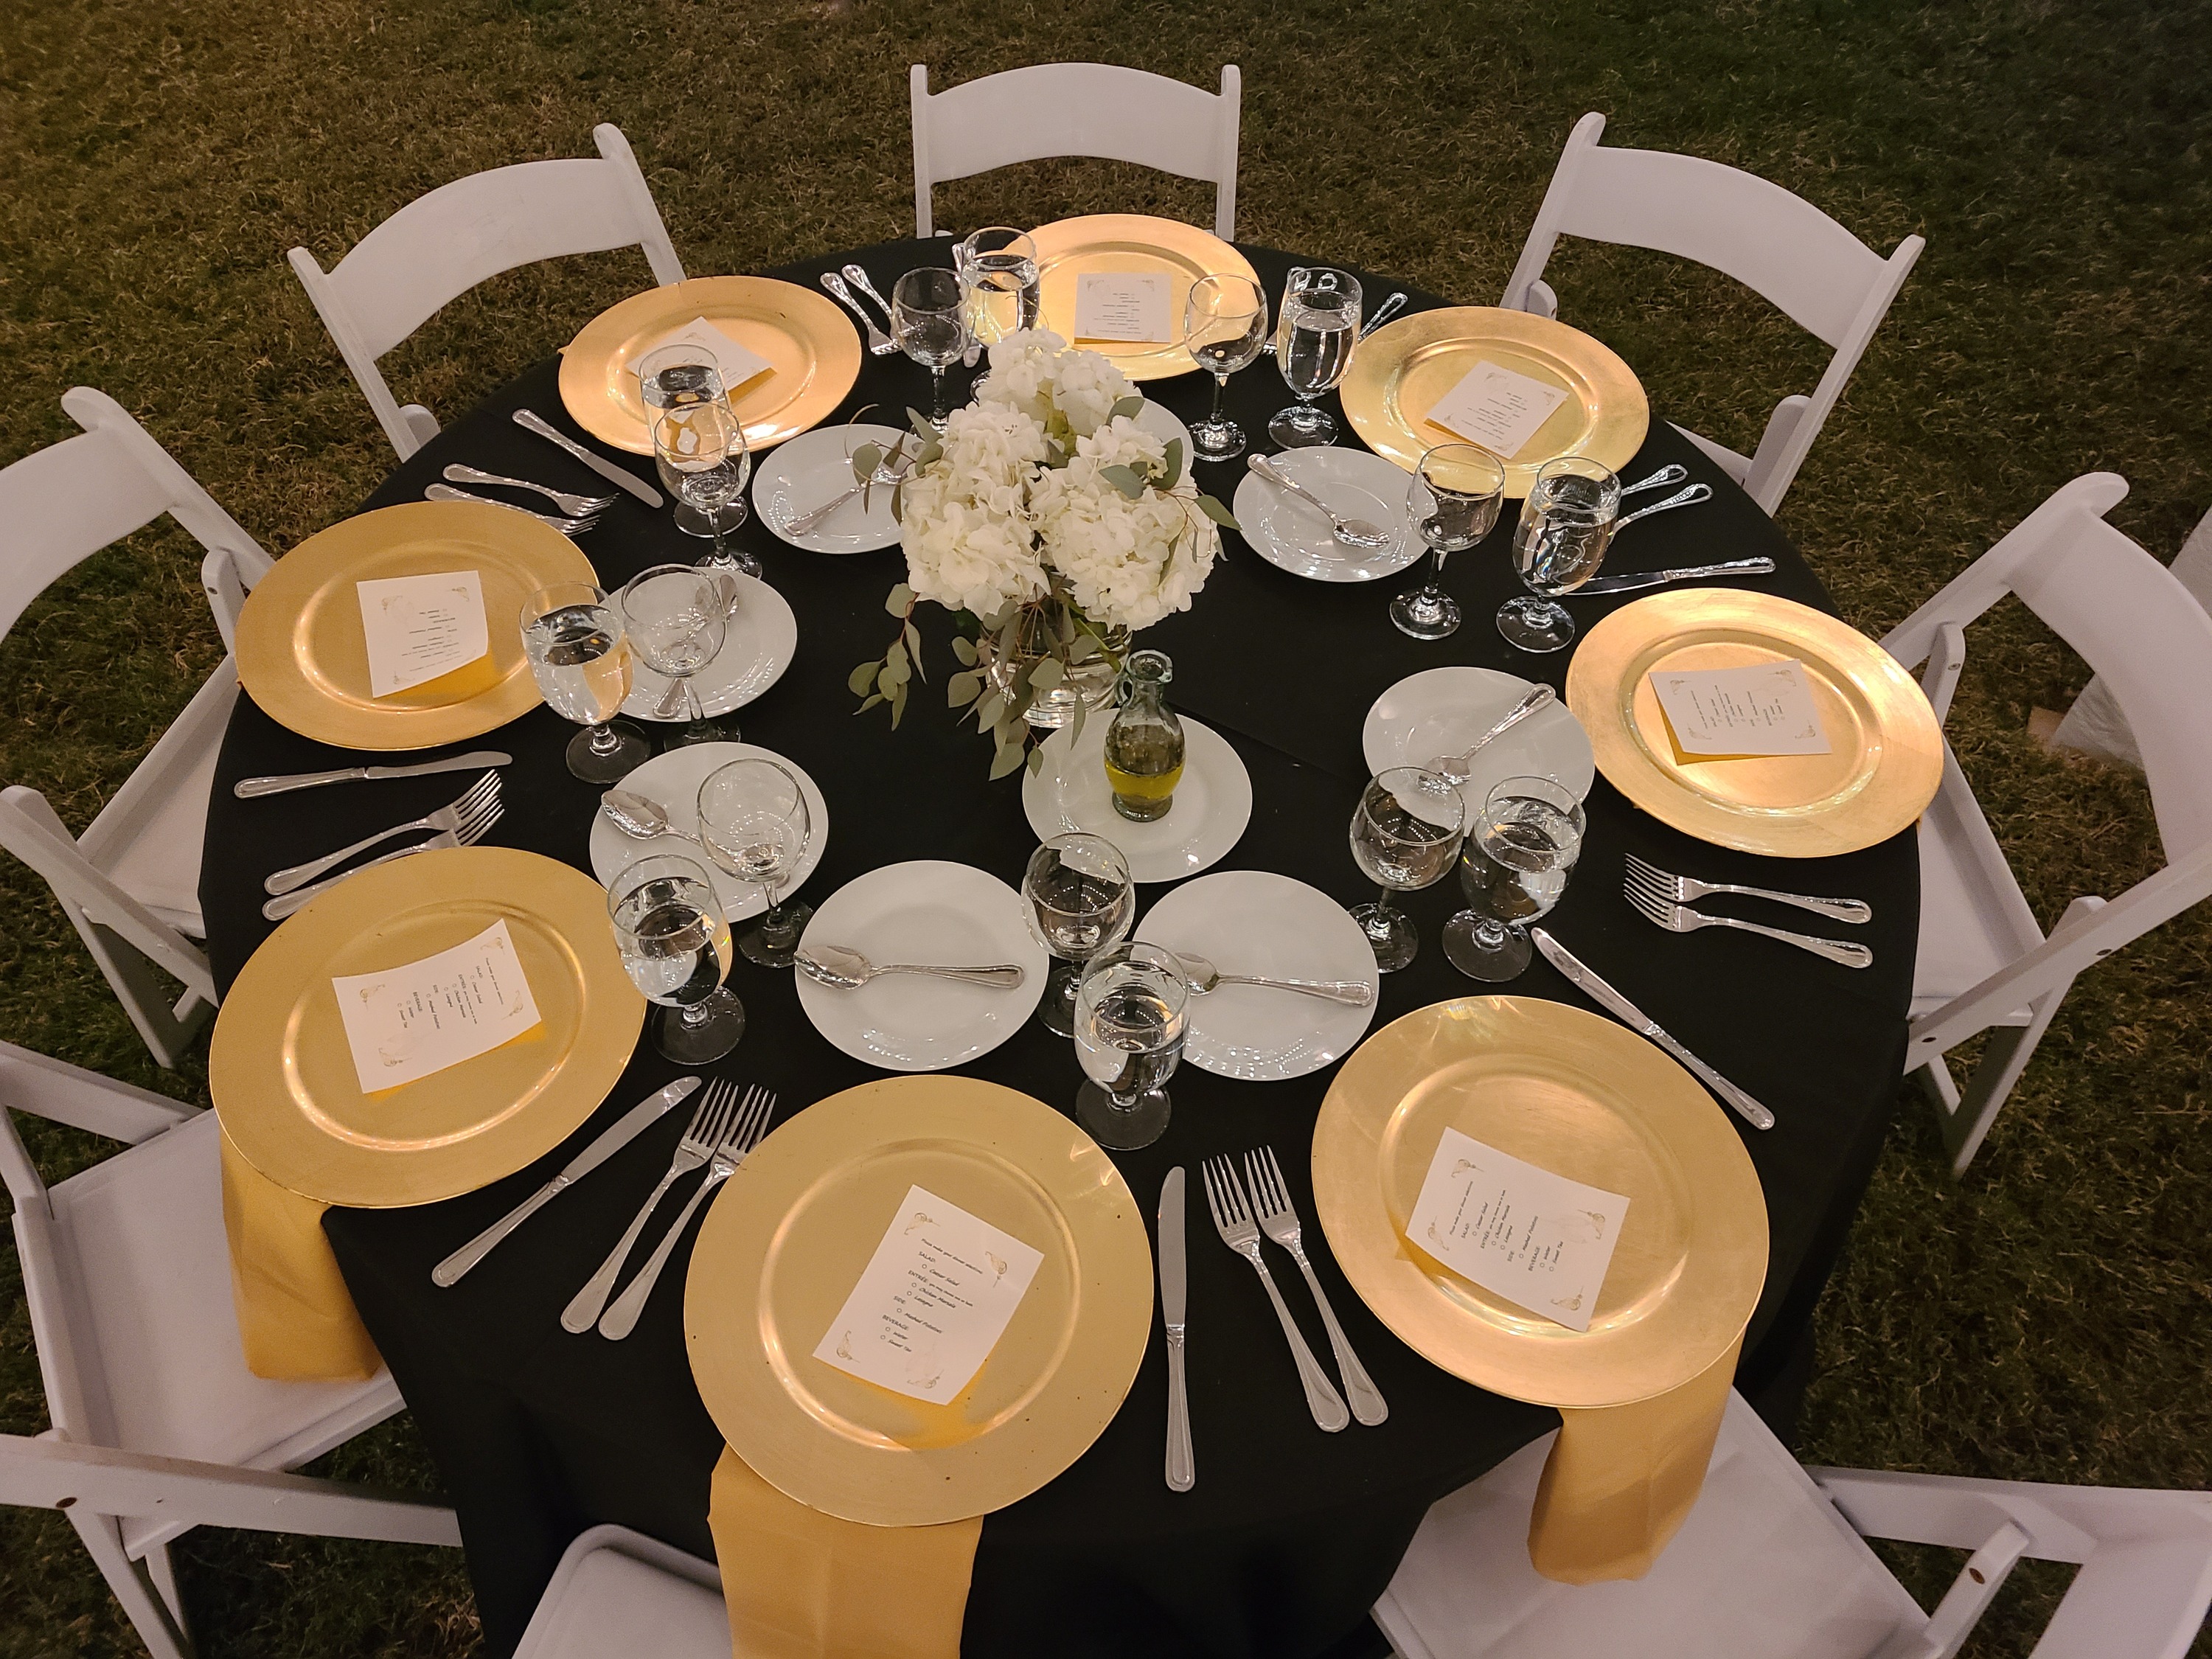 How to Book the Chair Rentals Cypress Texas Uses Year-Round Online